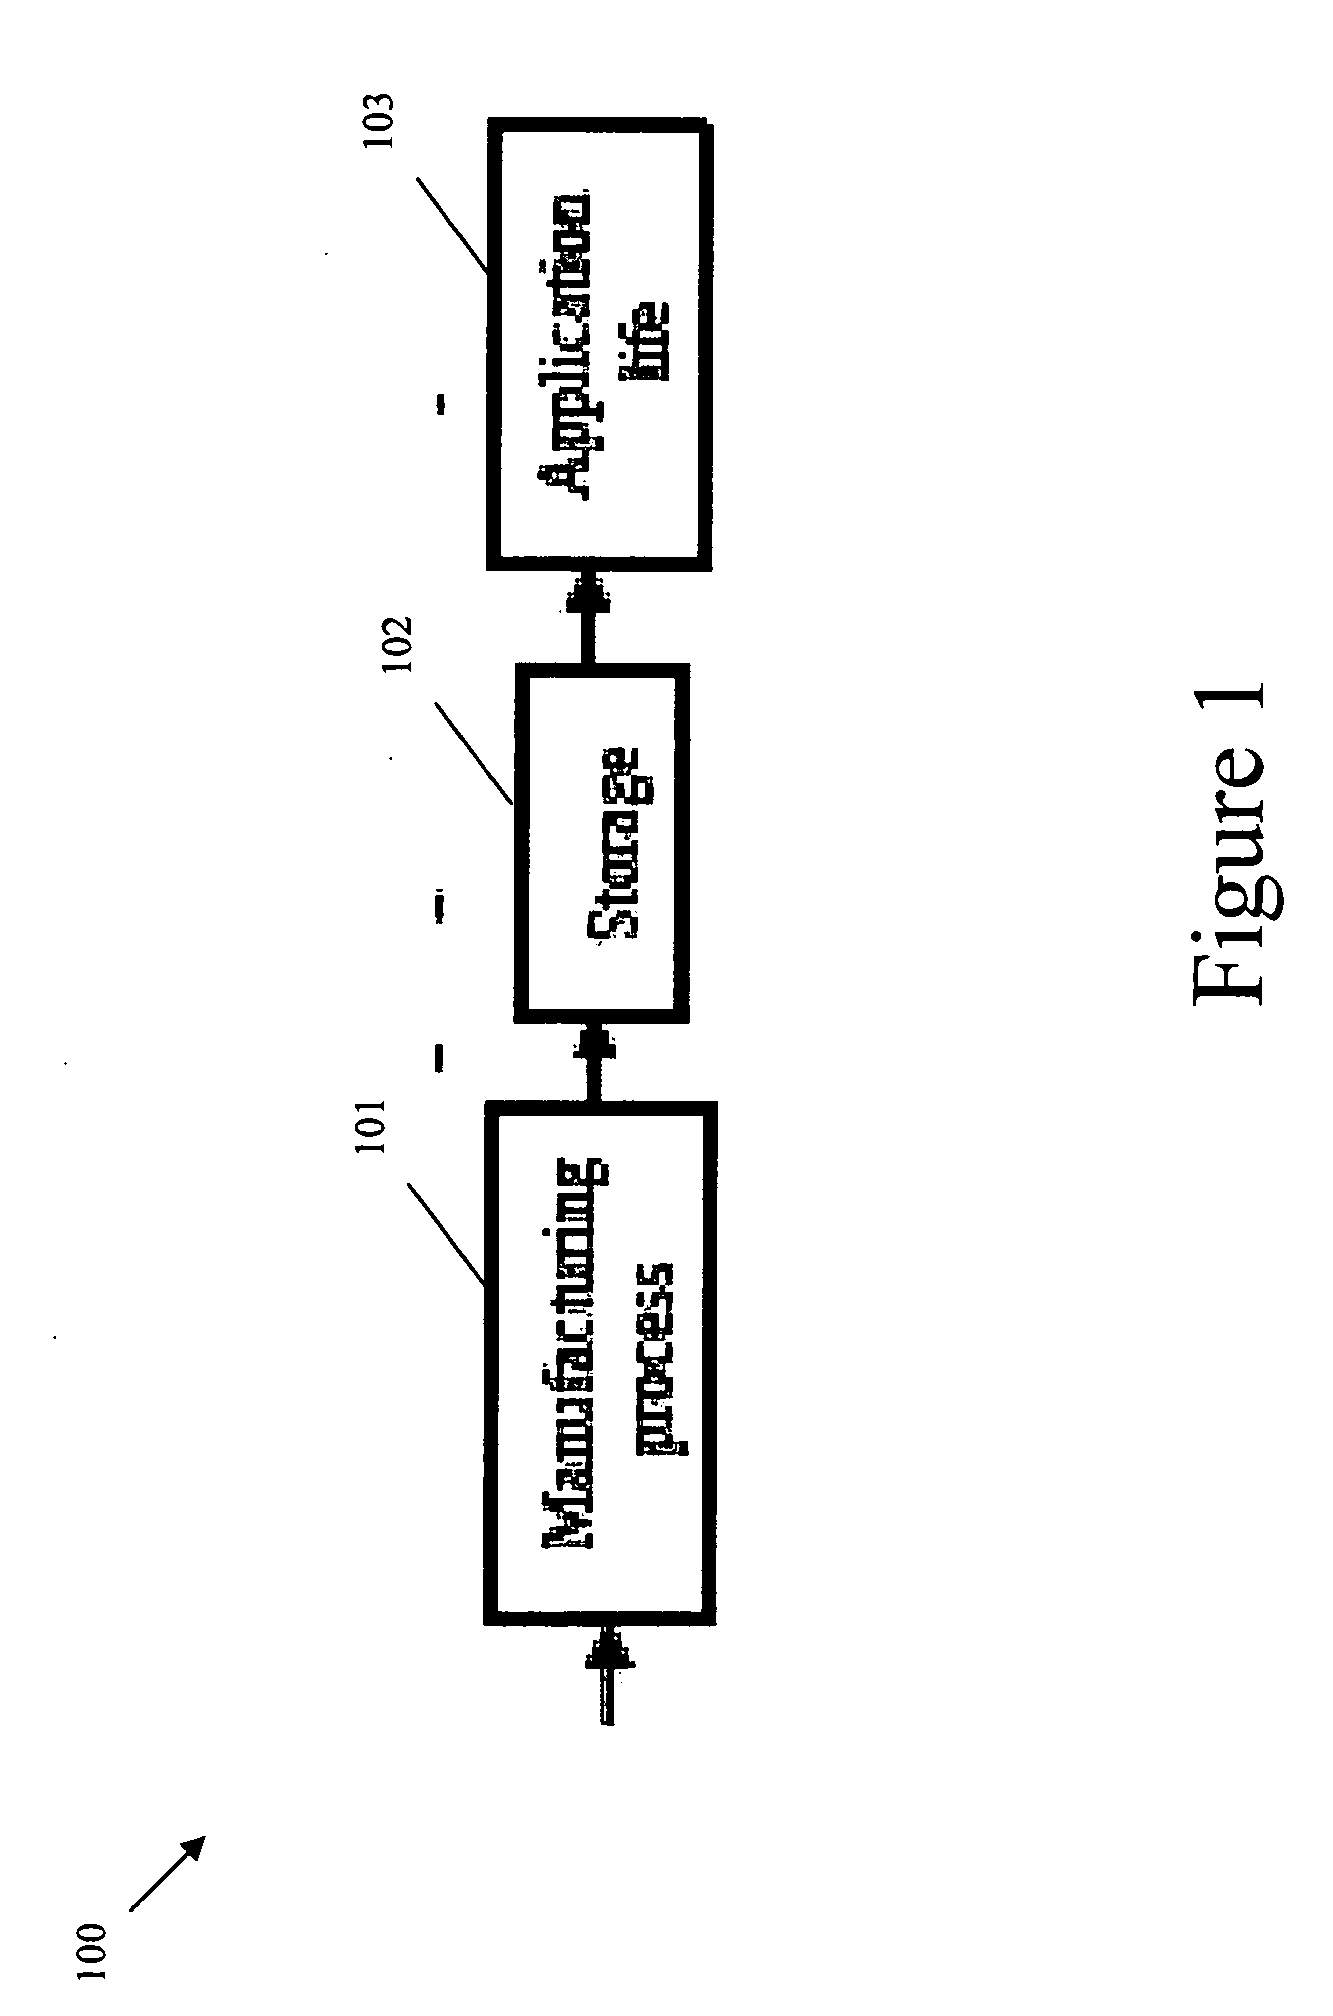 Method and apparatus for temperature, conductance and/or impedance testing in remote application of battery monitoring systems